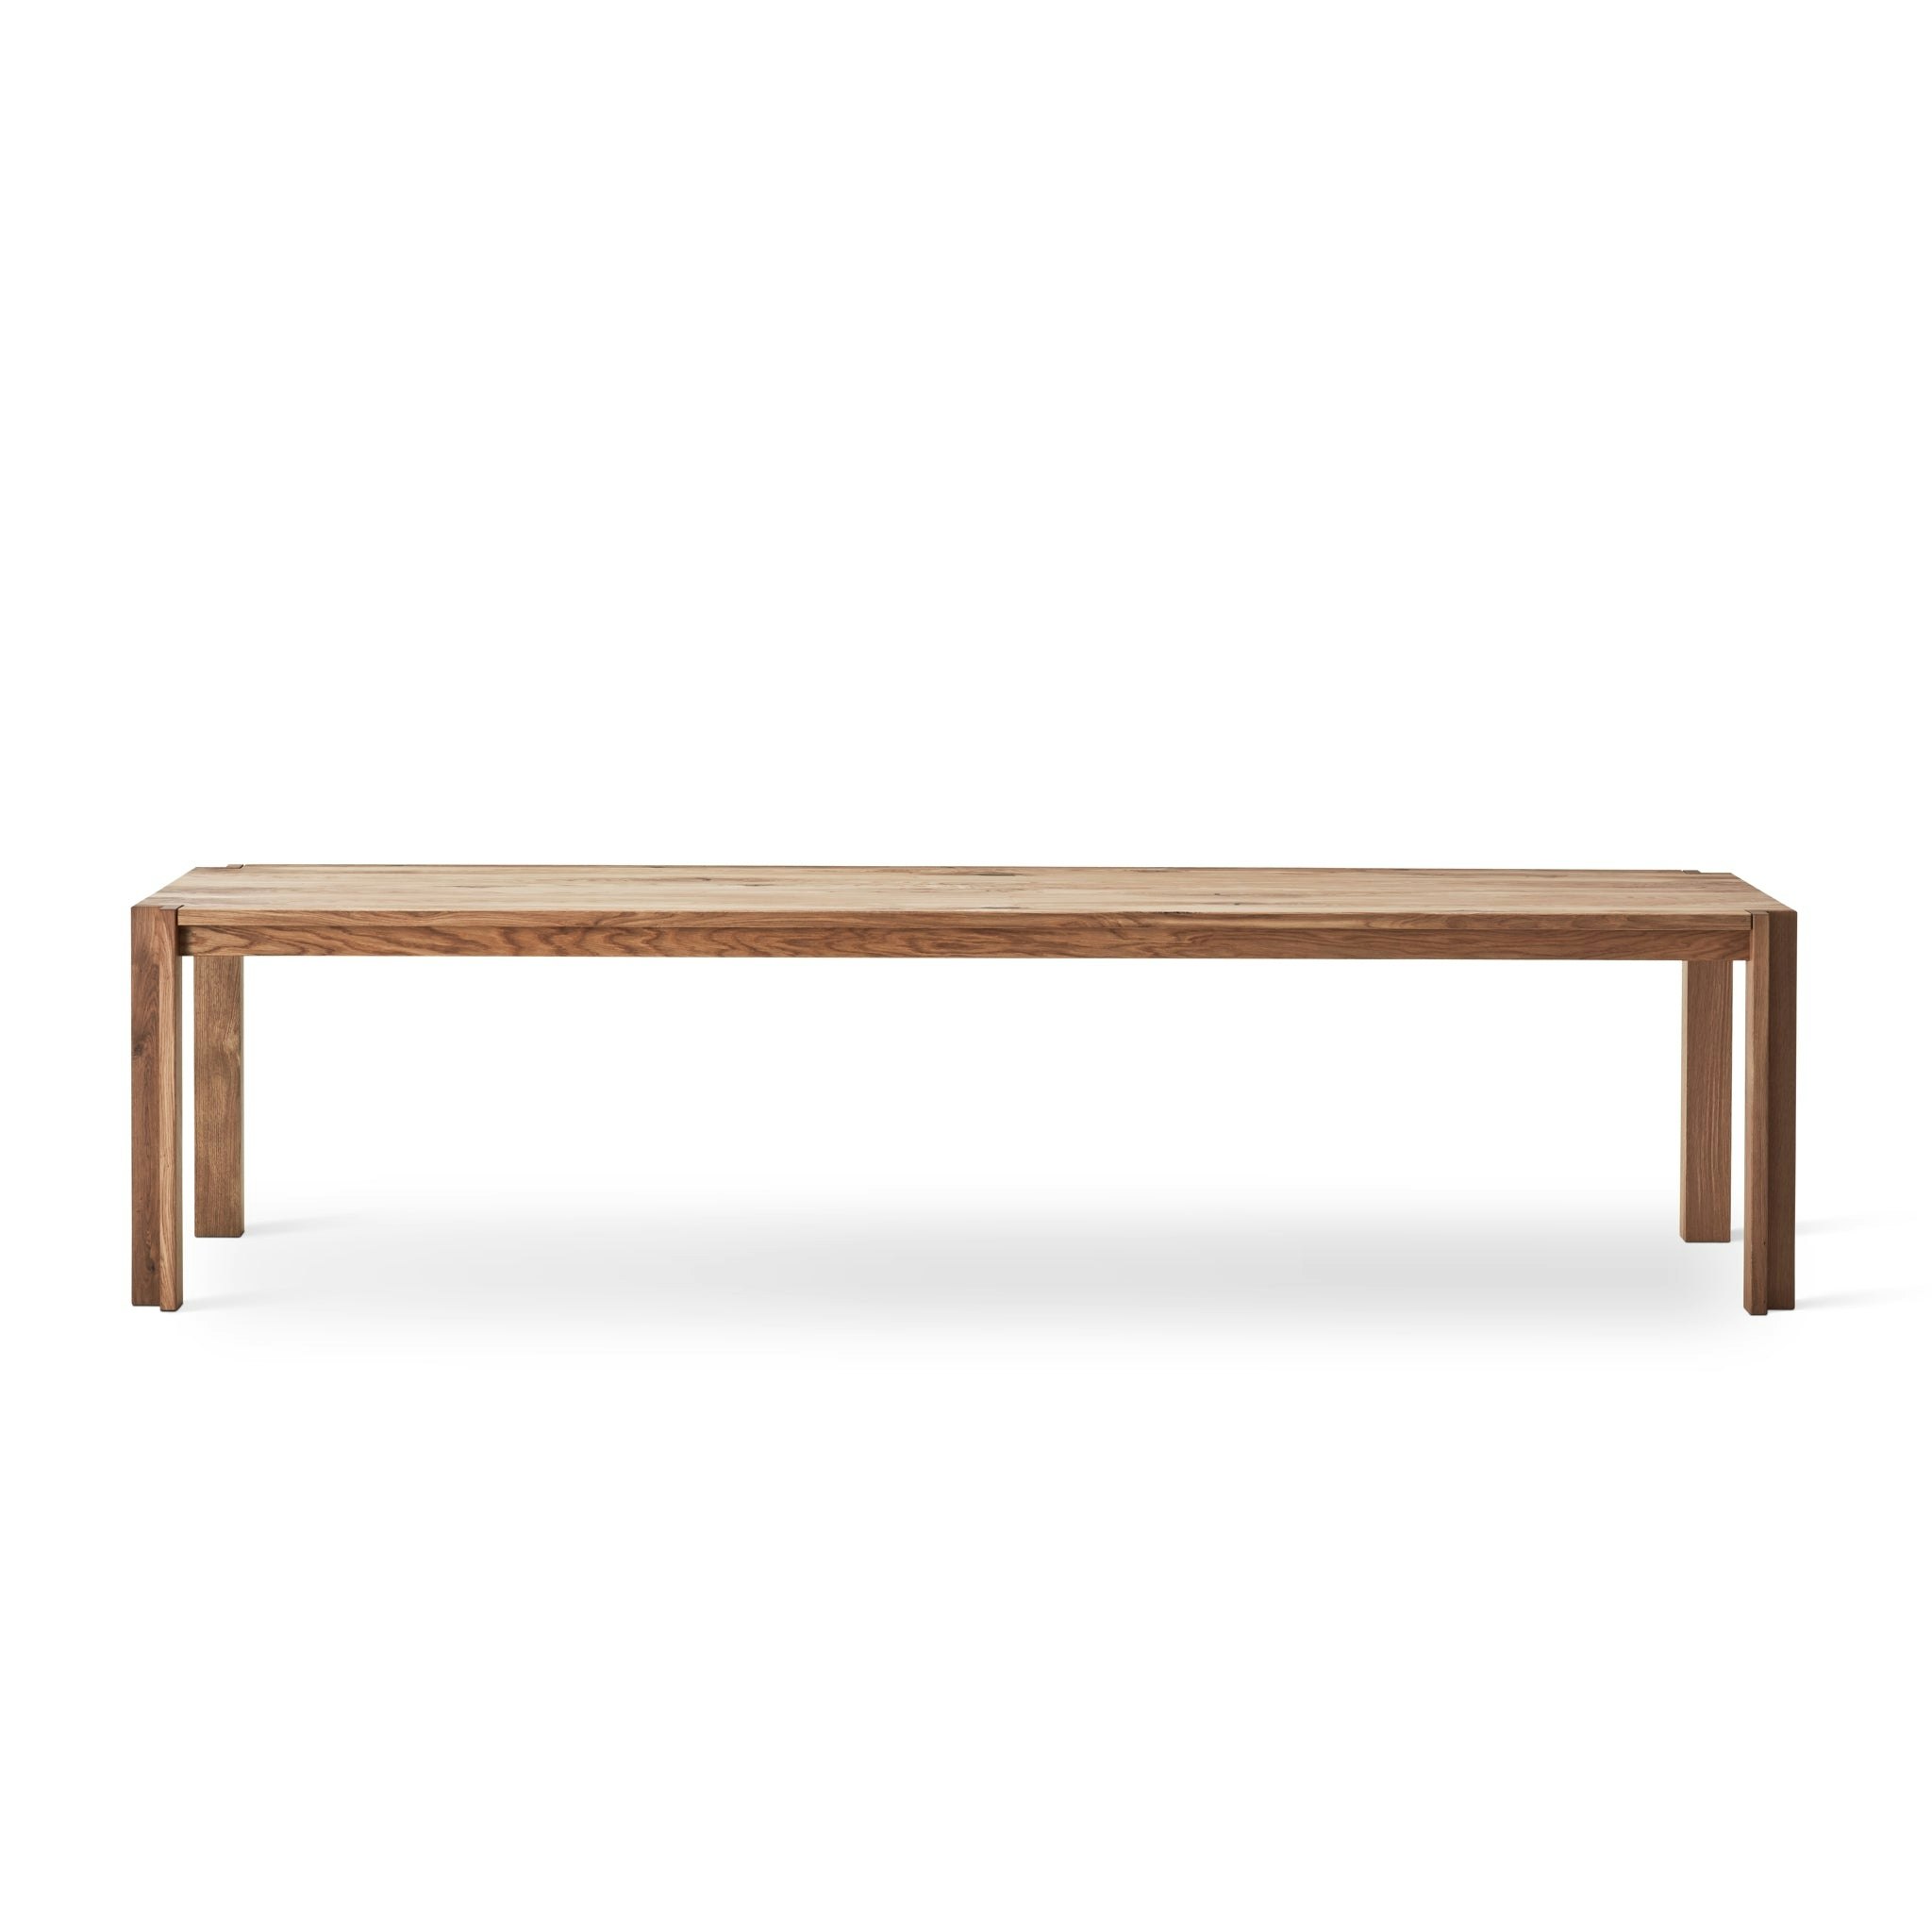 Jeppe Utzon Table #1 by Jeppe Utzon for Dk3